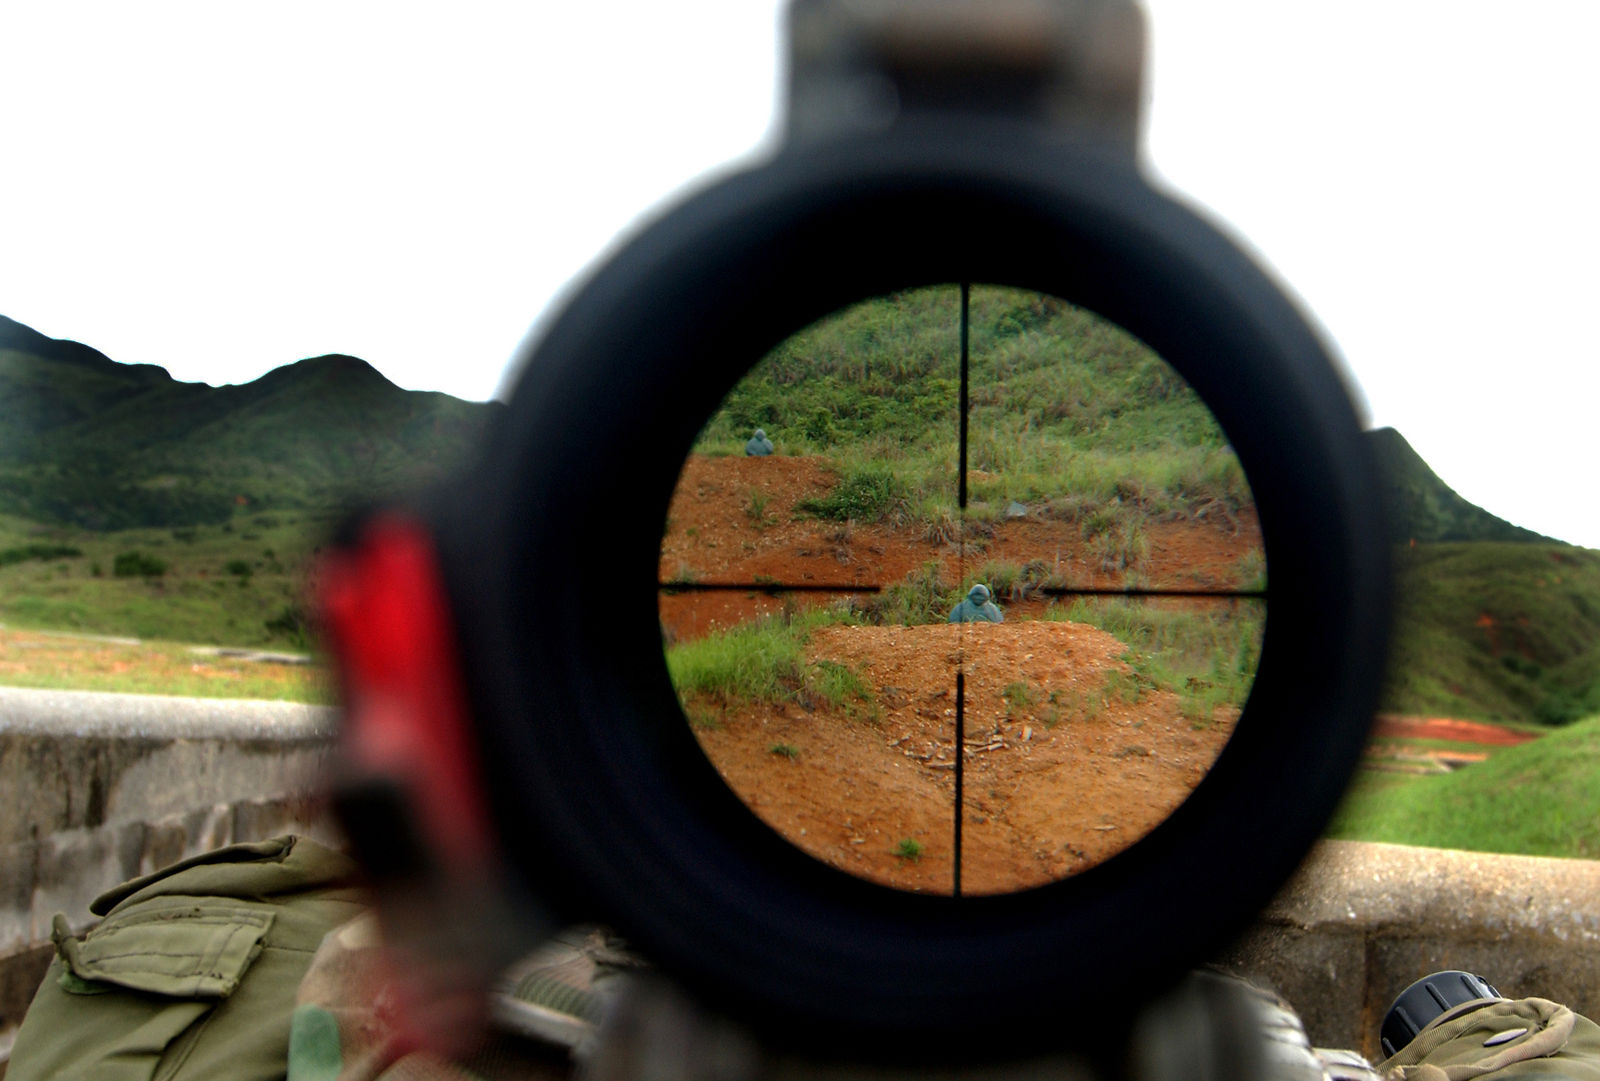 looking through the scope with soldier target on sight